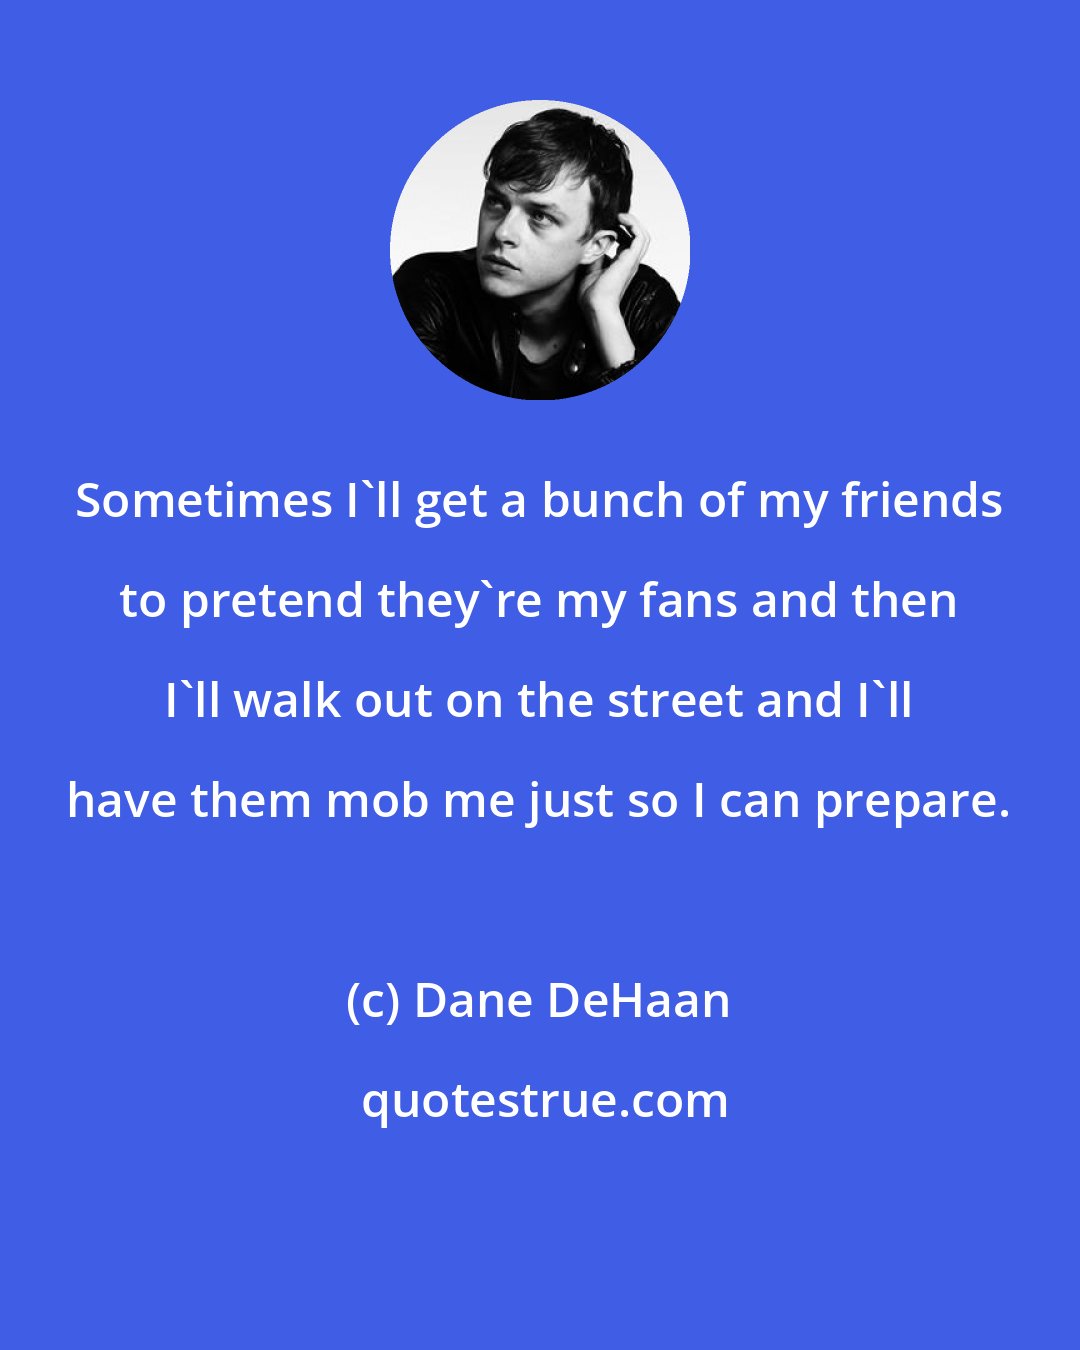 Dane DeHaan: Sometimes I'll get a bunch of my friends to pretend they're my fans and then I'll walk out on the street and I'll have them mob me just so I can prepare.